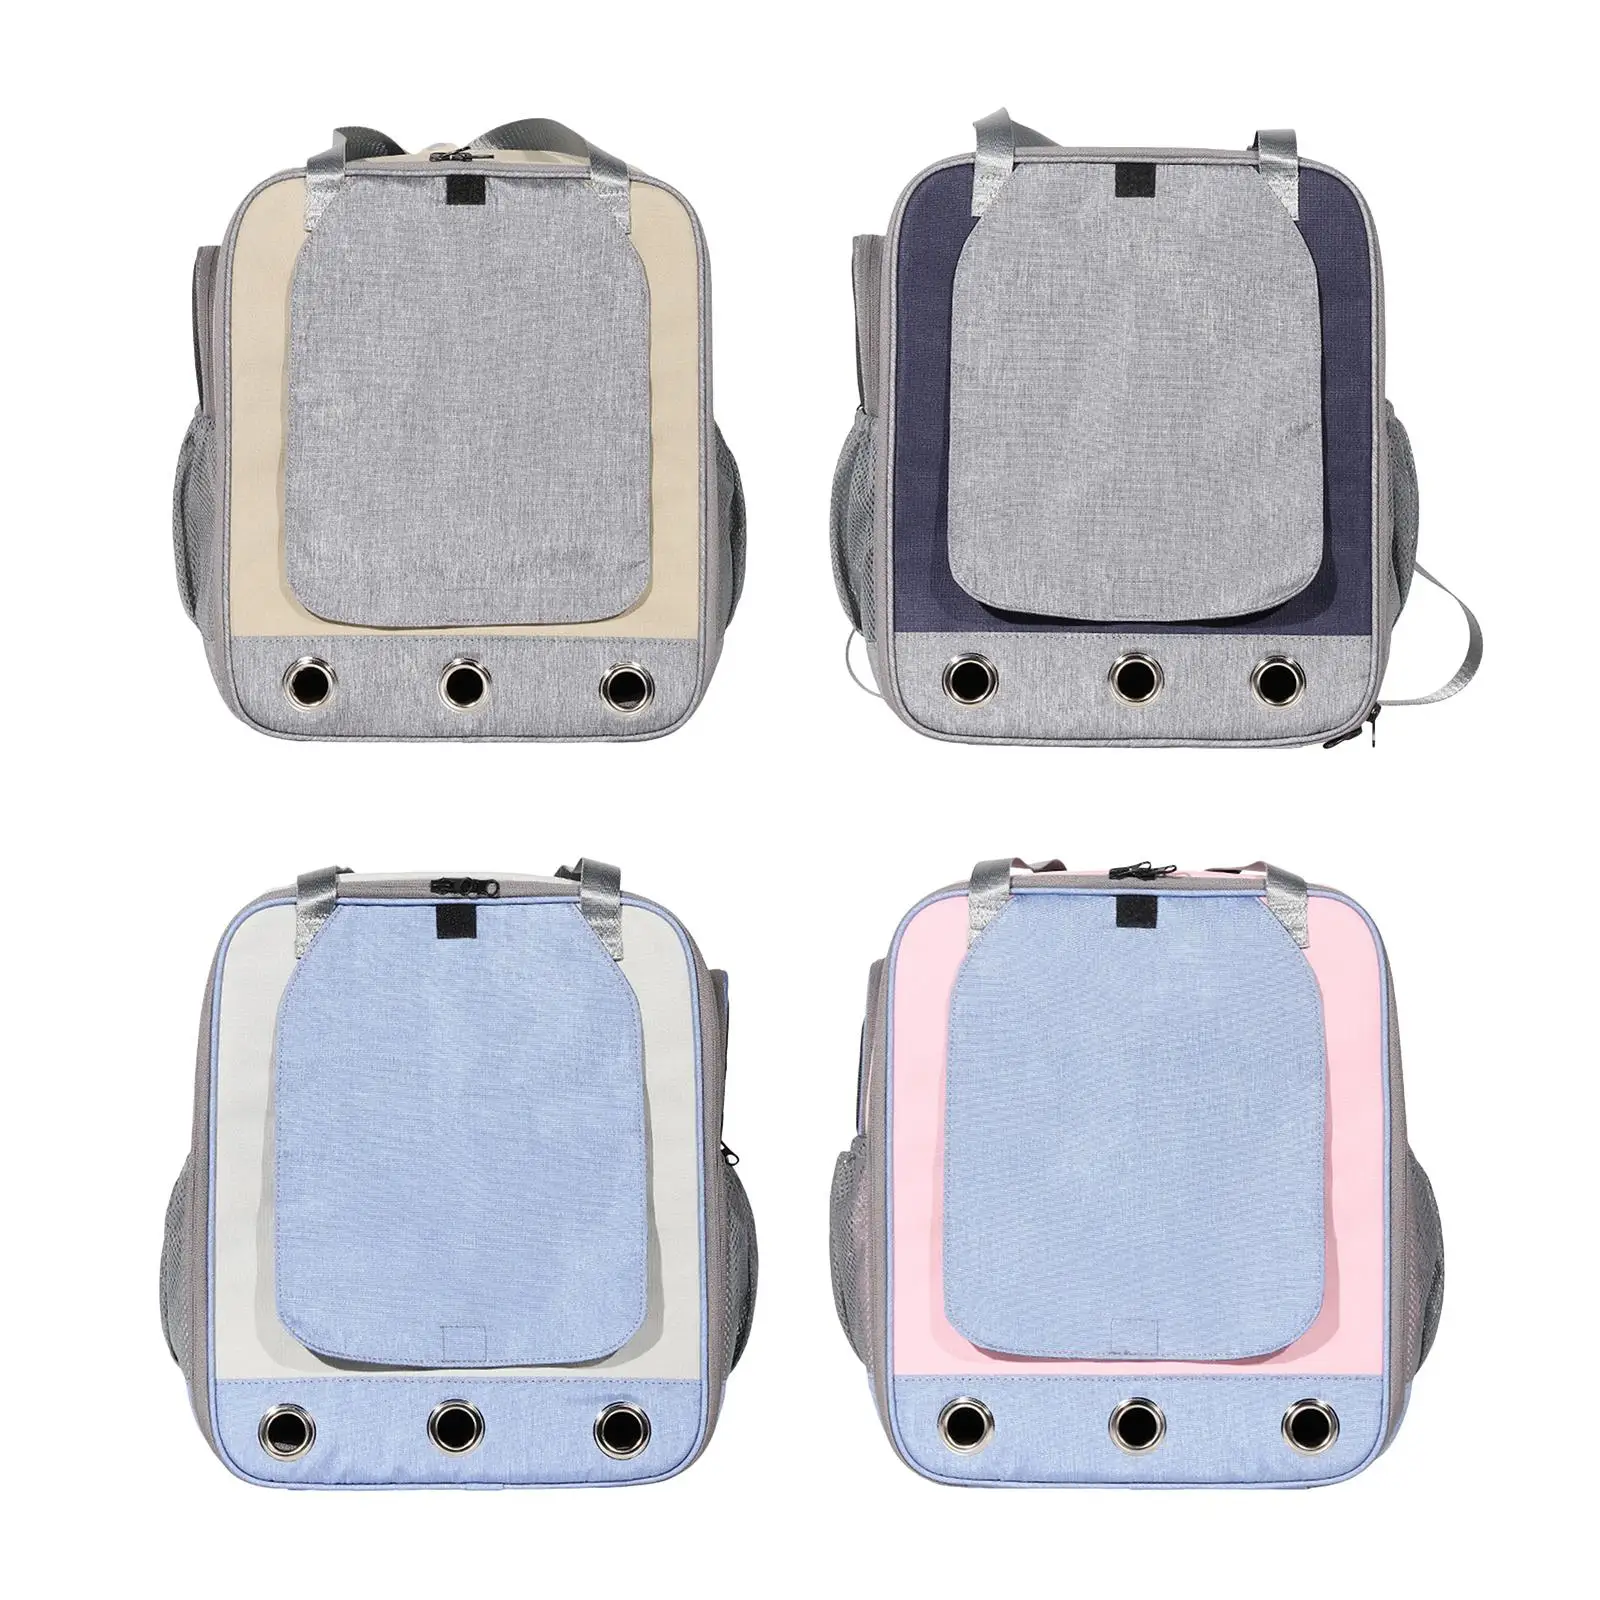 Comfortable Pet  Backpack Airline-Approved Shoulders Bag Handbag Cage for Dogs and Cats, Puppy Puppy Bunny Hiking Outdoor Use